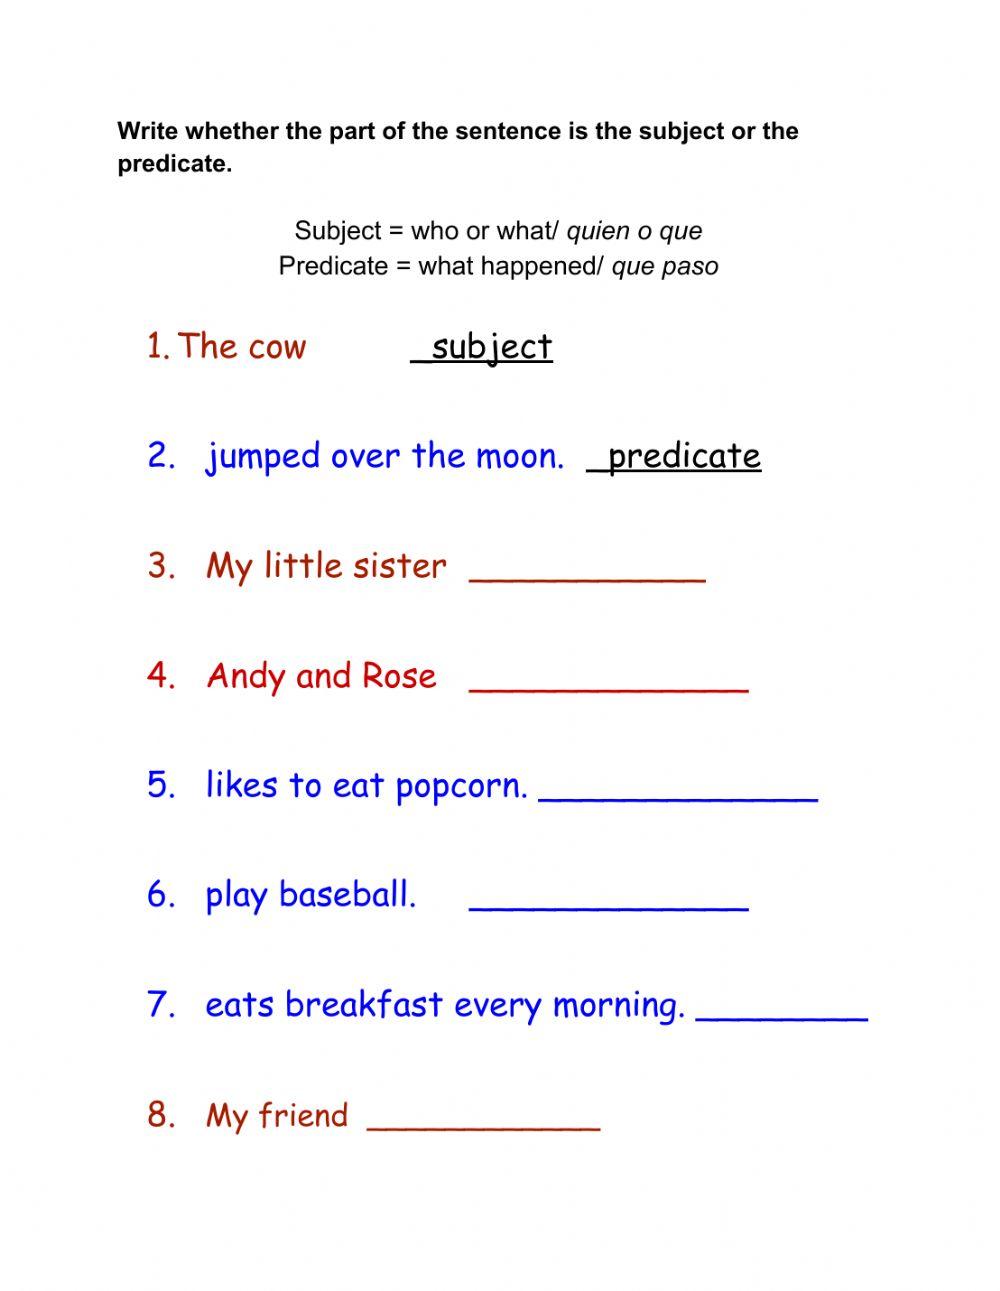 Subject and predicate